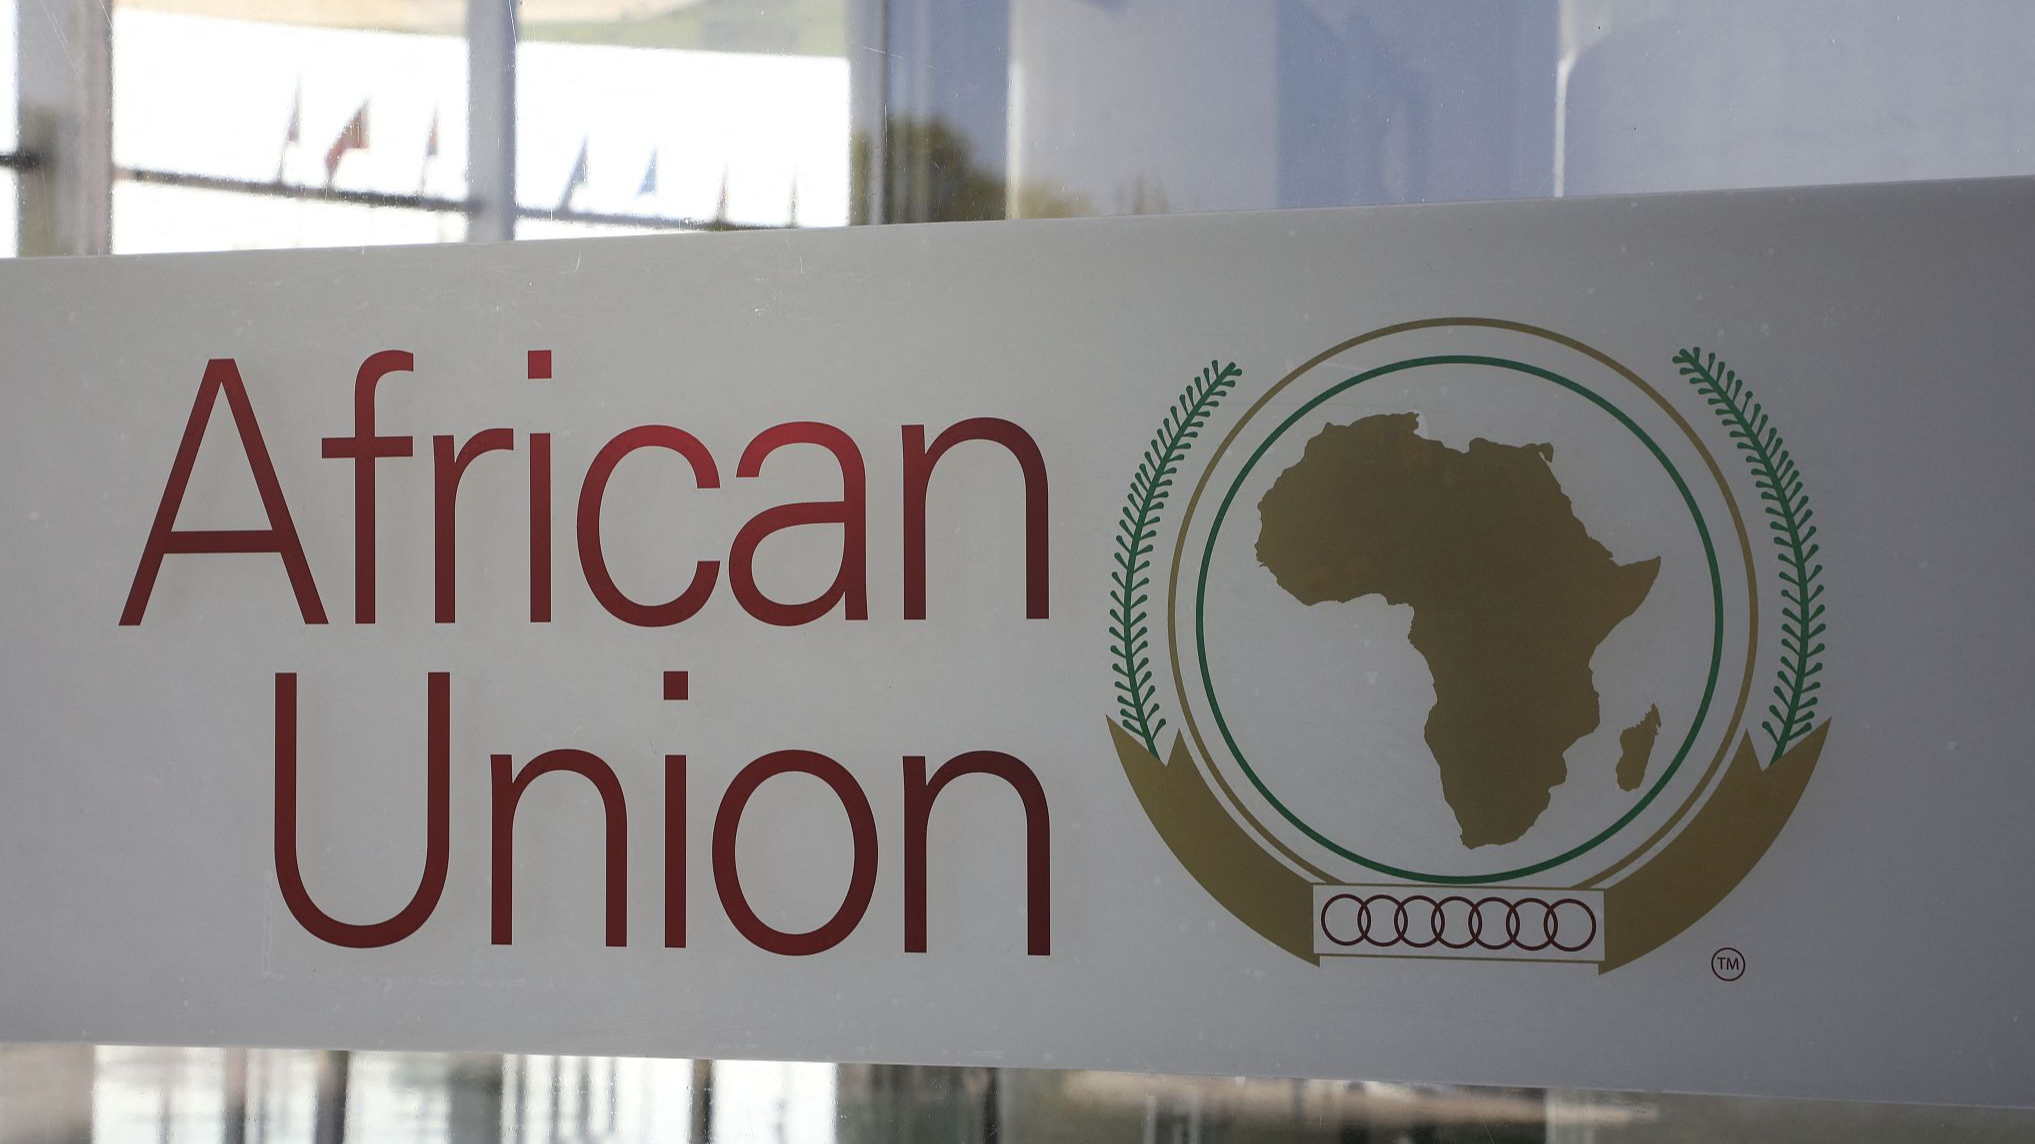 The logo of the African Union (AU) is seen at the entrance of the AU headquarters in Addis Ababa, capital city of Ethiopia, March 13, 2019. /CFP